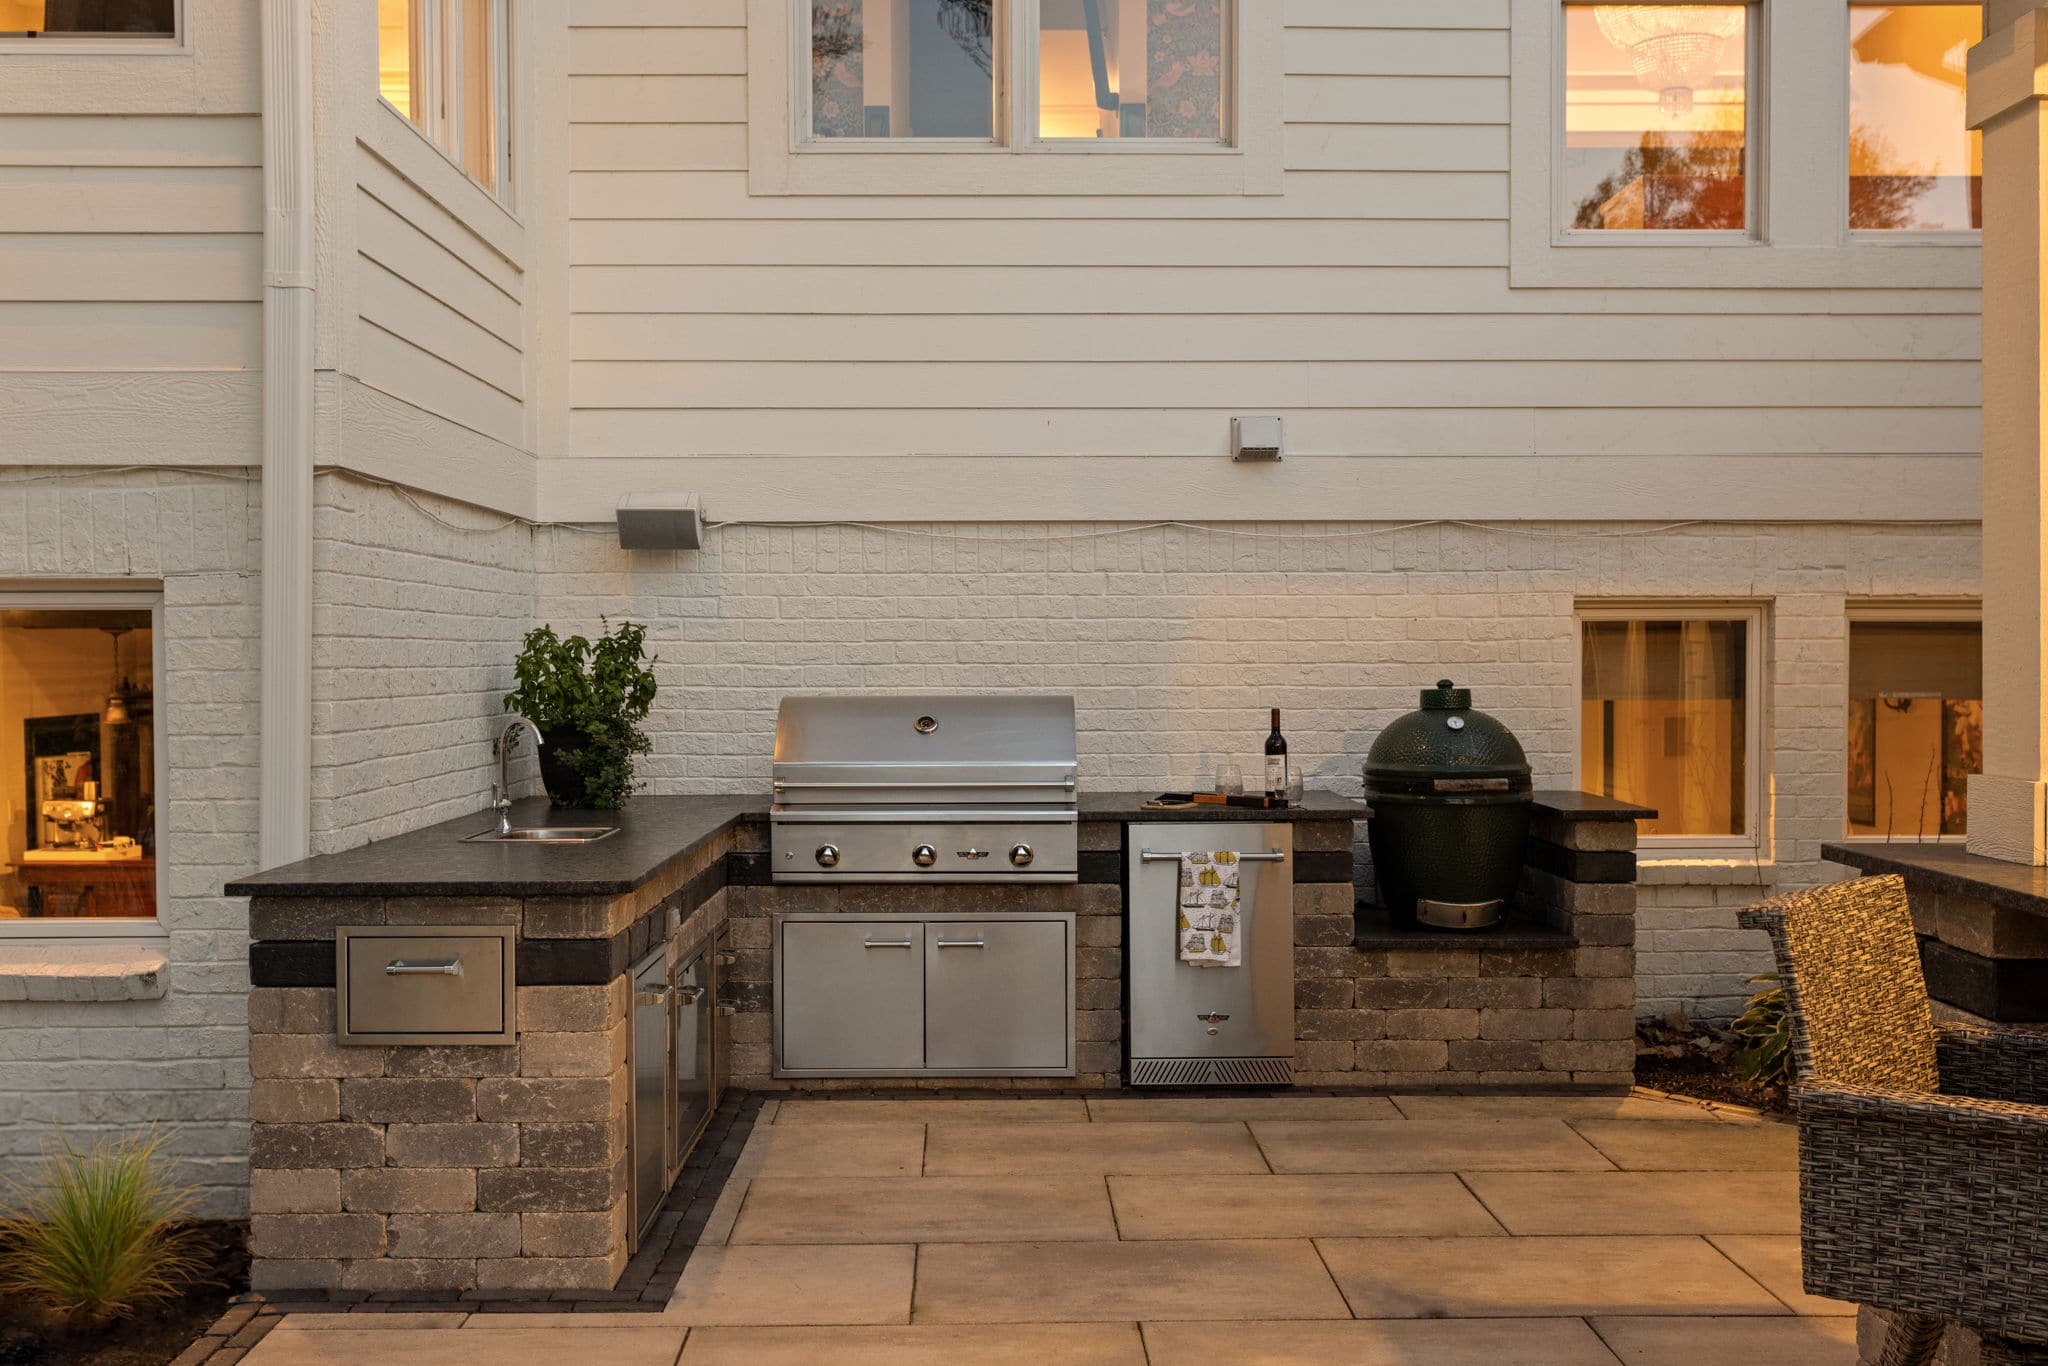 Outdoor kitchen with built-in sink, grill and smoker.